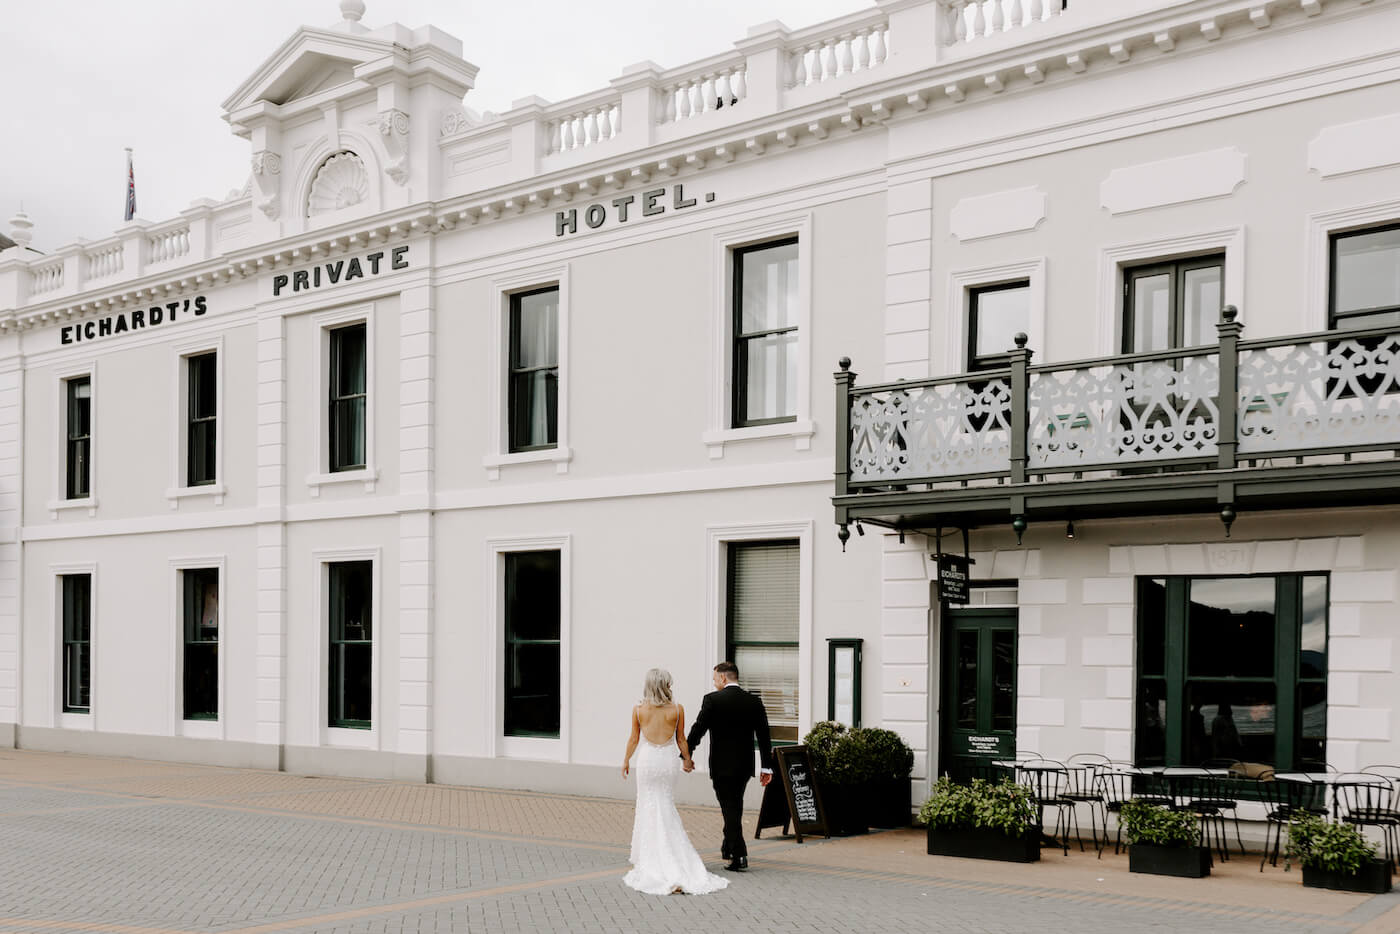 Eichardt's Private Hotel Queenstown - Occasions - Weddings